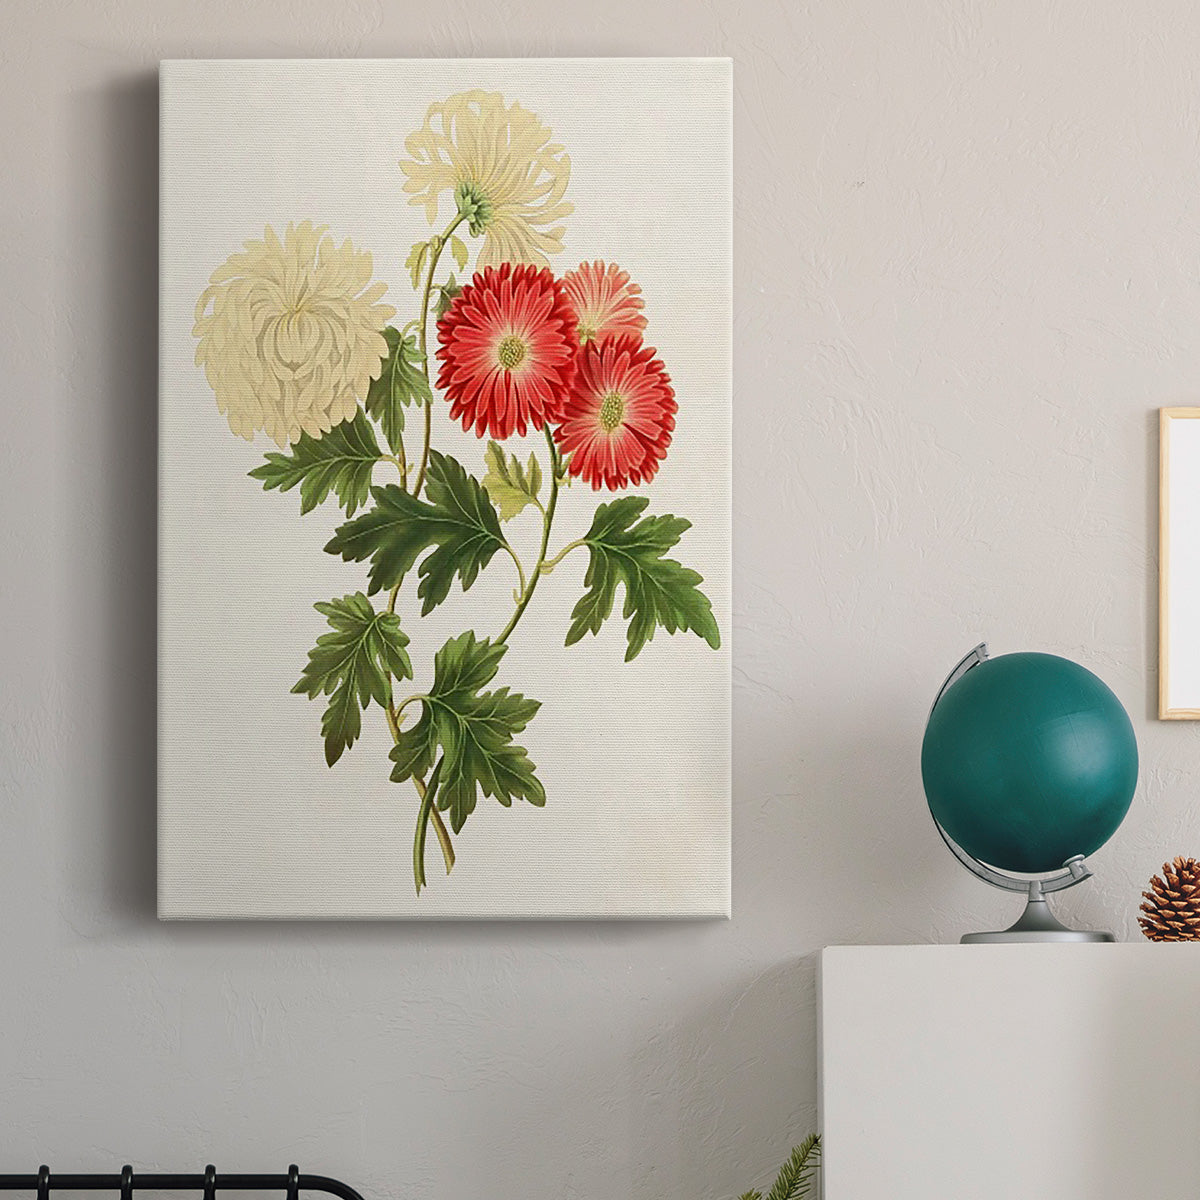 Flowers of the Seasons I Premium Gallery Wrapped Canvas - Ready to Hang